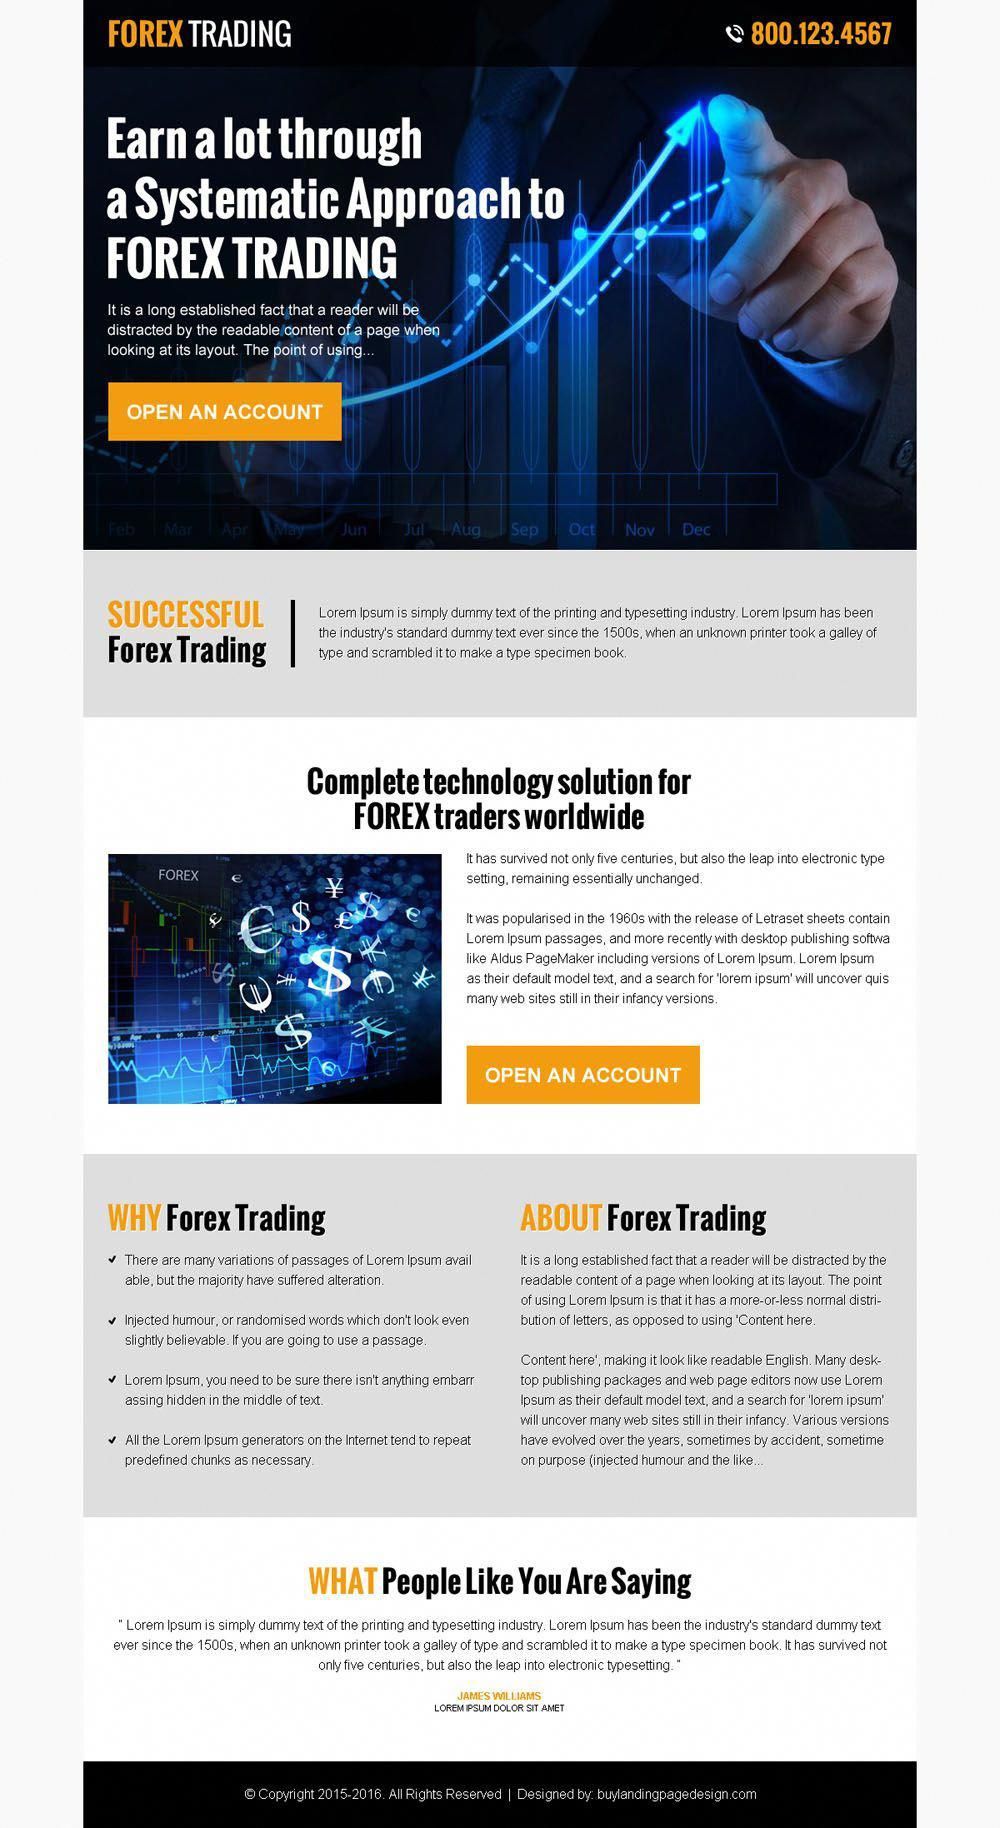 Forex Trader Forextradingsoftware Landing Page Forex Trading Forex